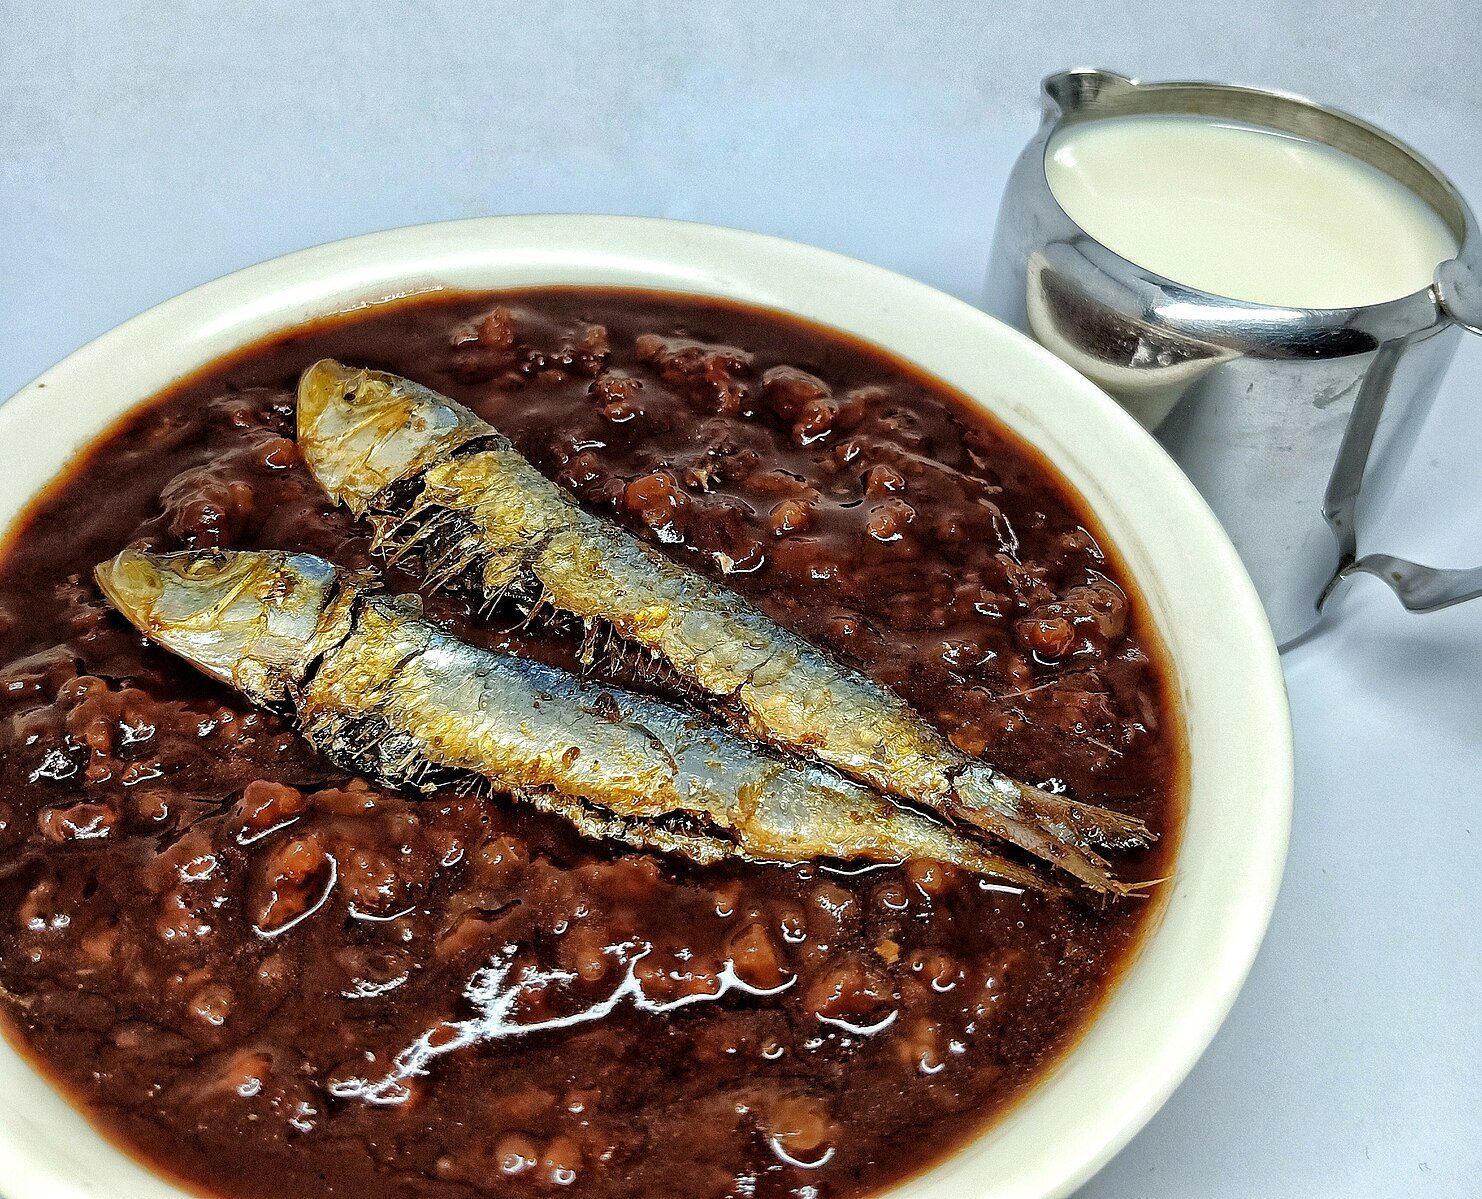 Rice, rice, baby! Champorado among top rice puddings in world, according to Taste Atlas